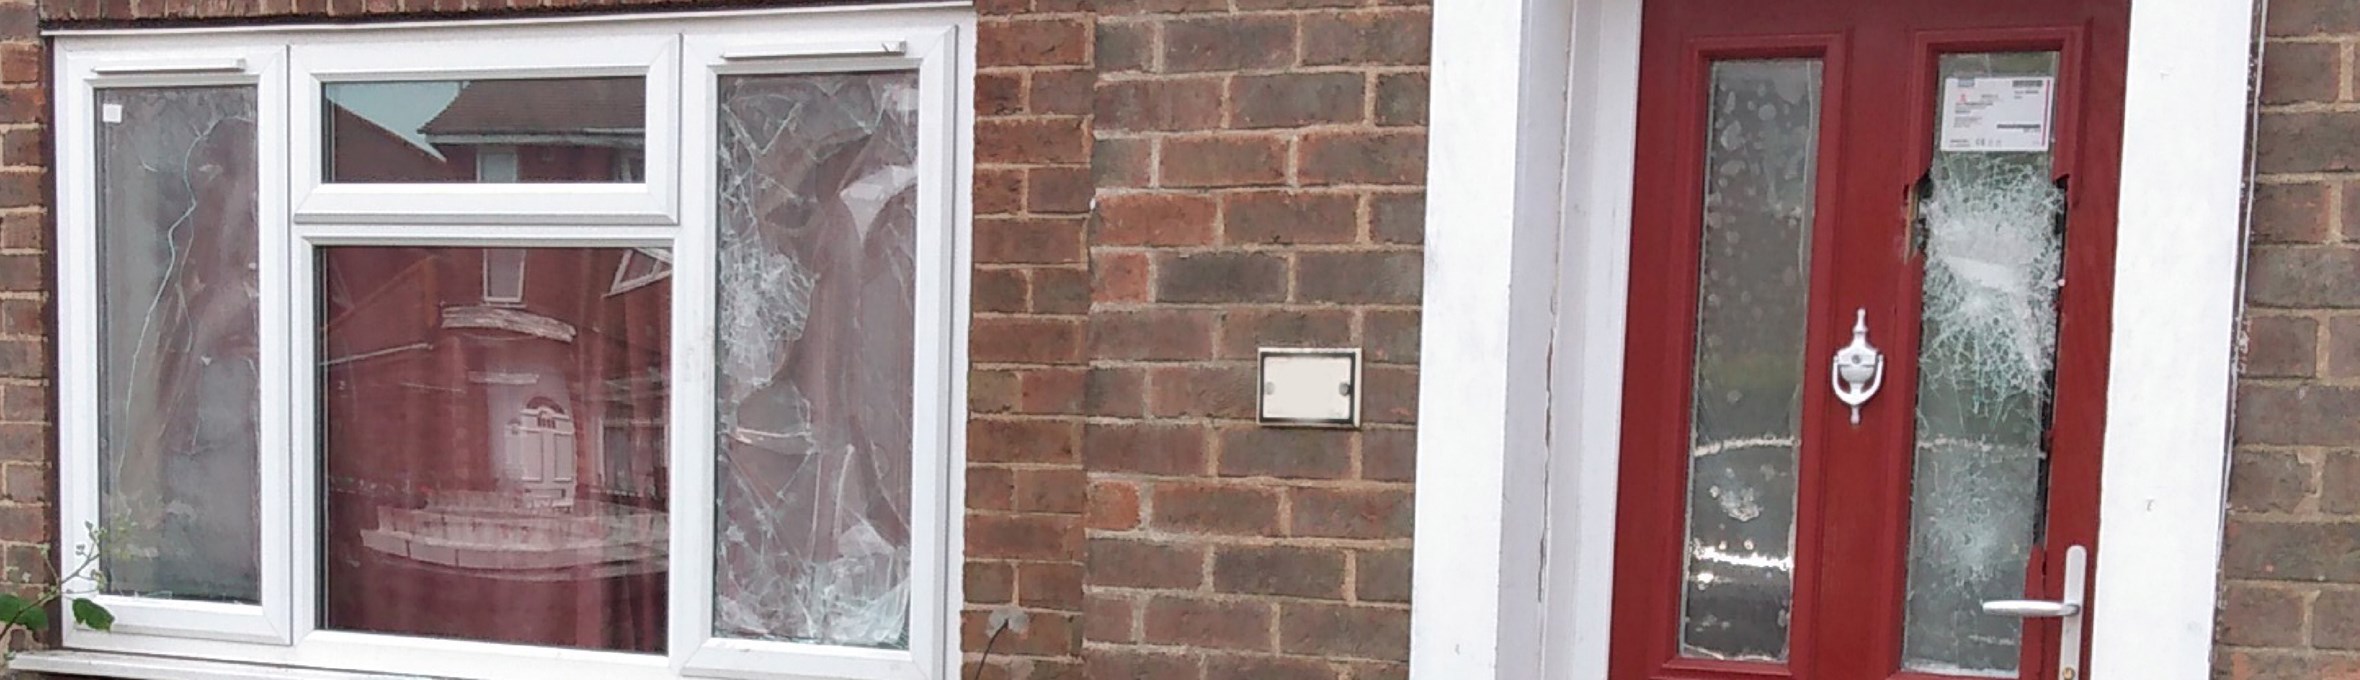 Property closed in Sutton in Ashfield with smashed window and door